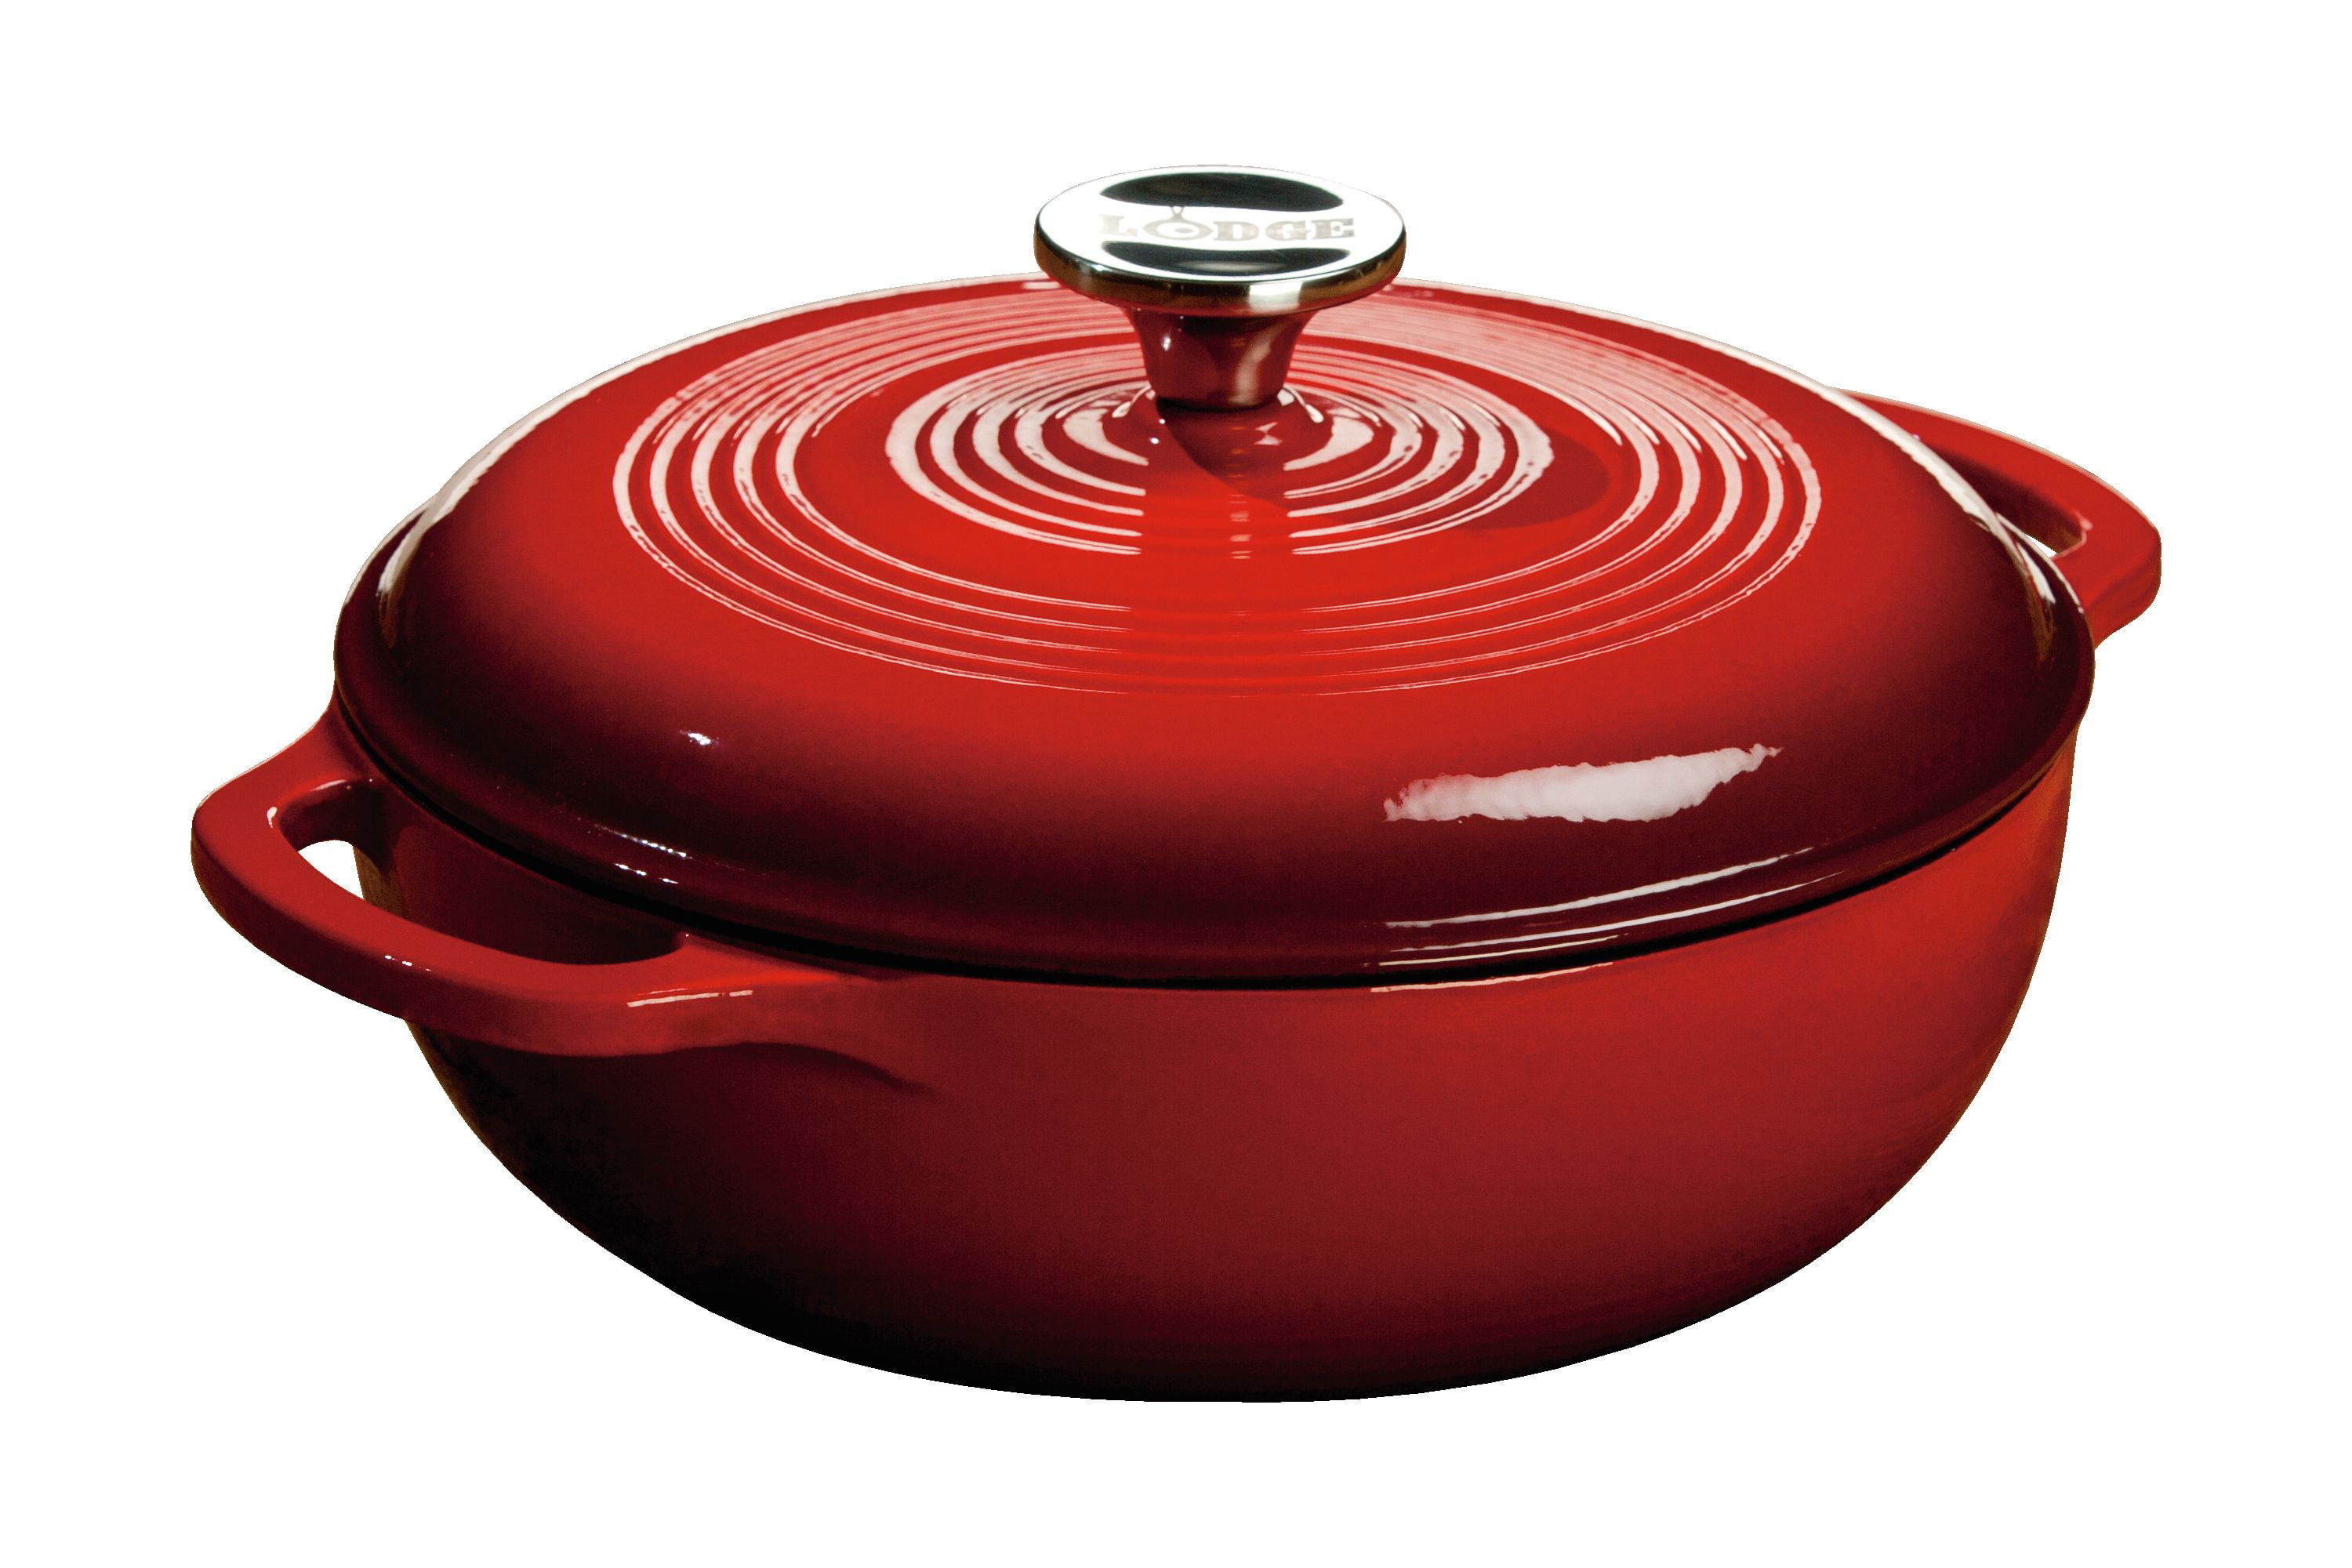 3qt Enamel Cast Iron Dutch Oven with Loop Handles, Covered Dutch Oven, Enamel Stockpot with Lid, Red (1 Count)